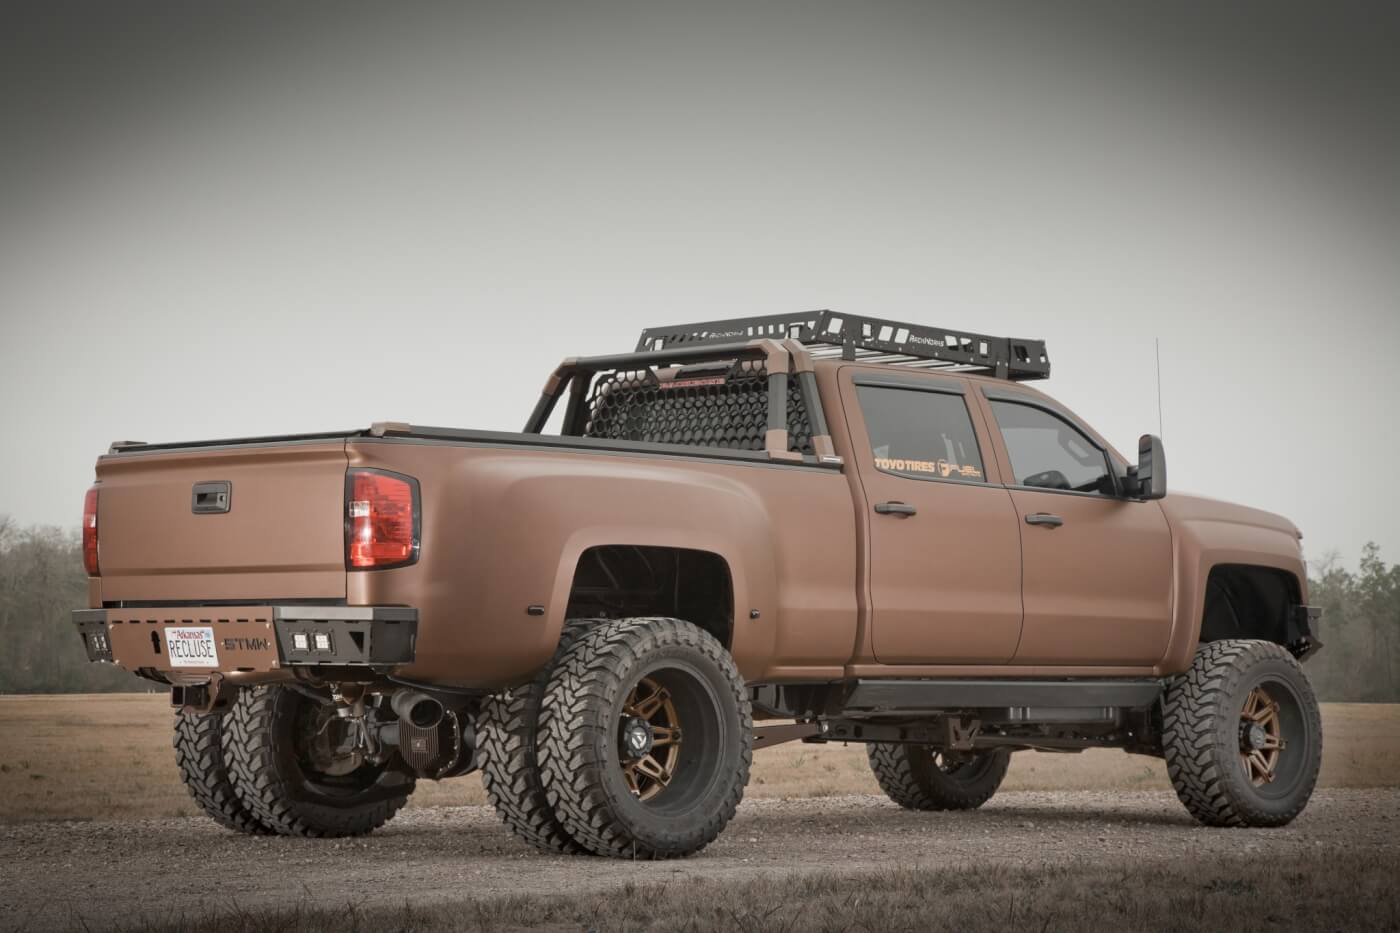 Recluse looks as good from the rear as it does from the front. Backbone headache rack, ShowTime Metal Works bumper and RackWorks roof rack all complement each other and add to rugged yet functional look of this truck. 